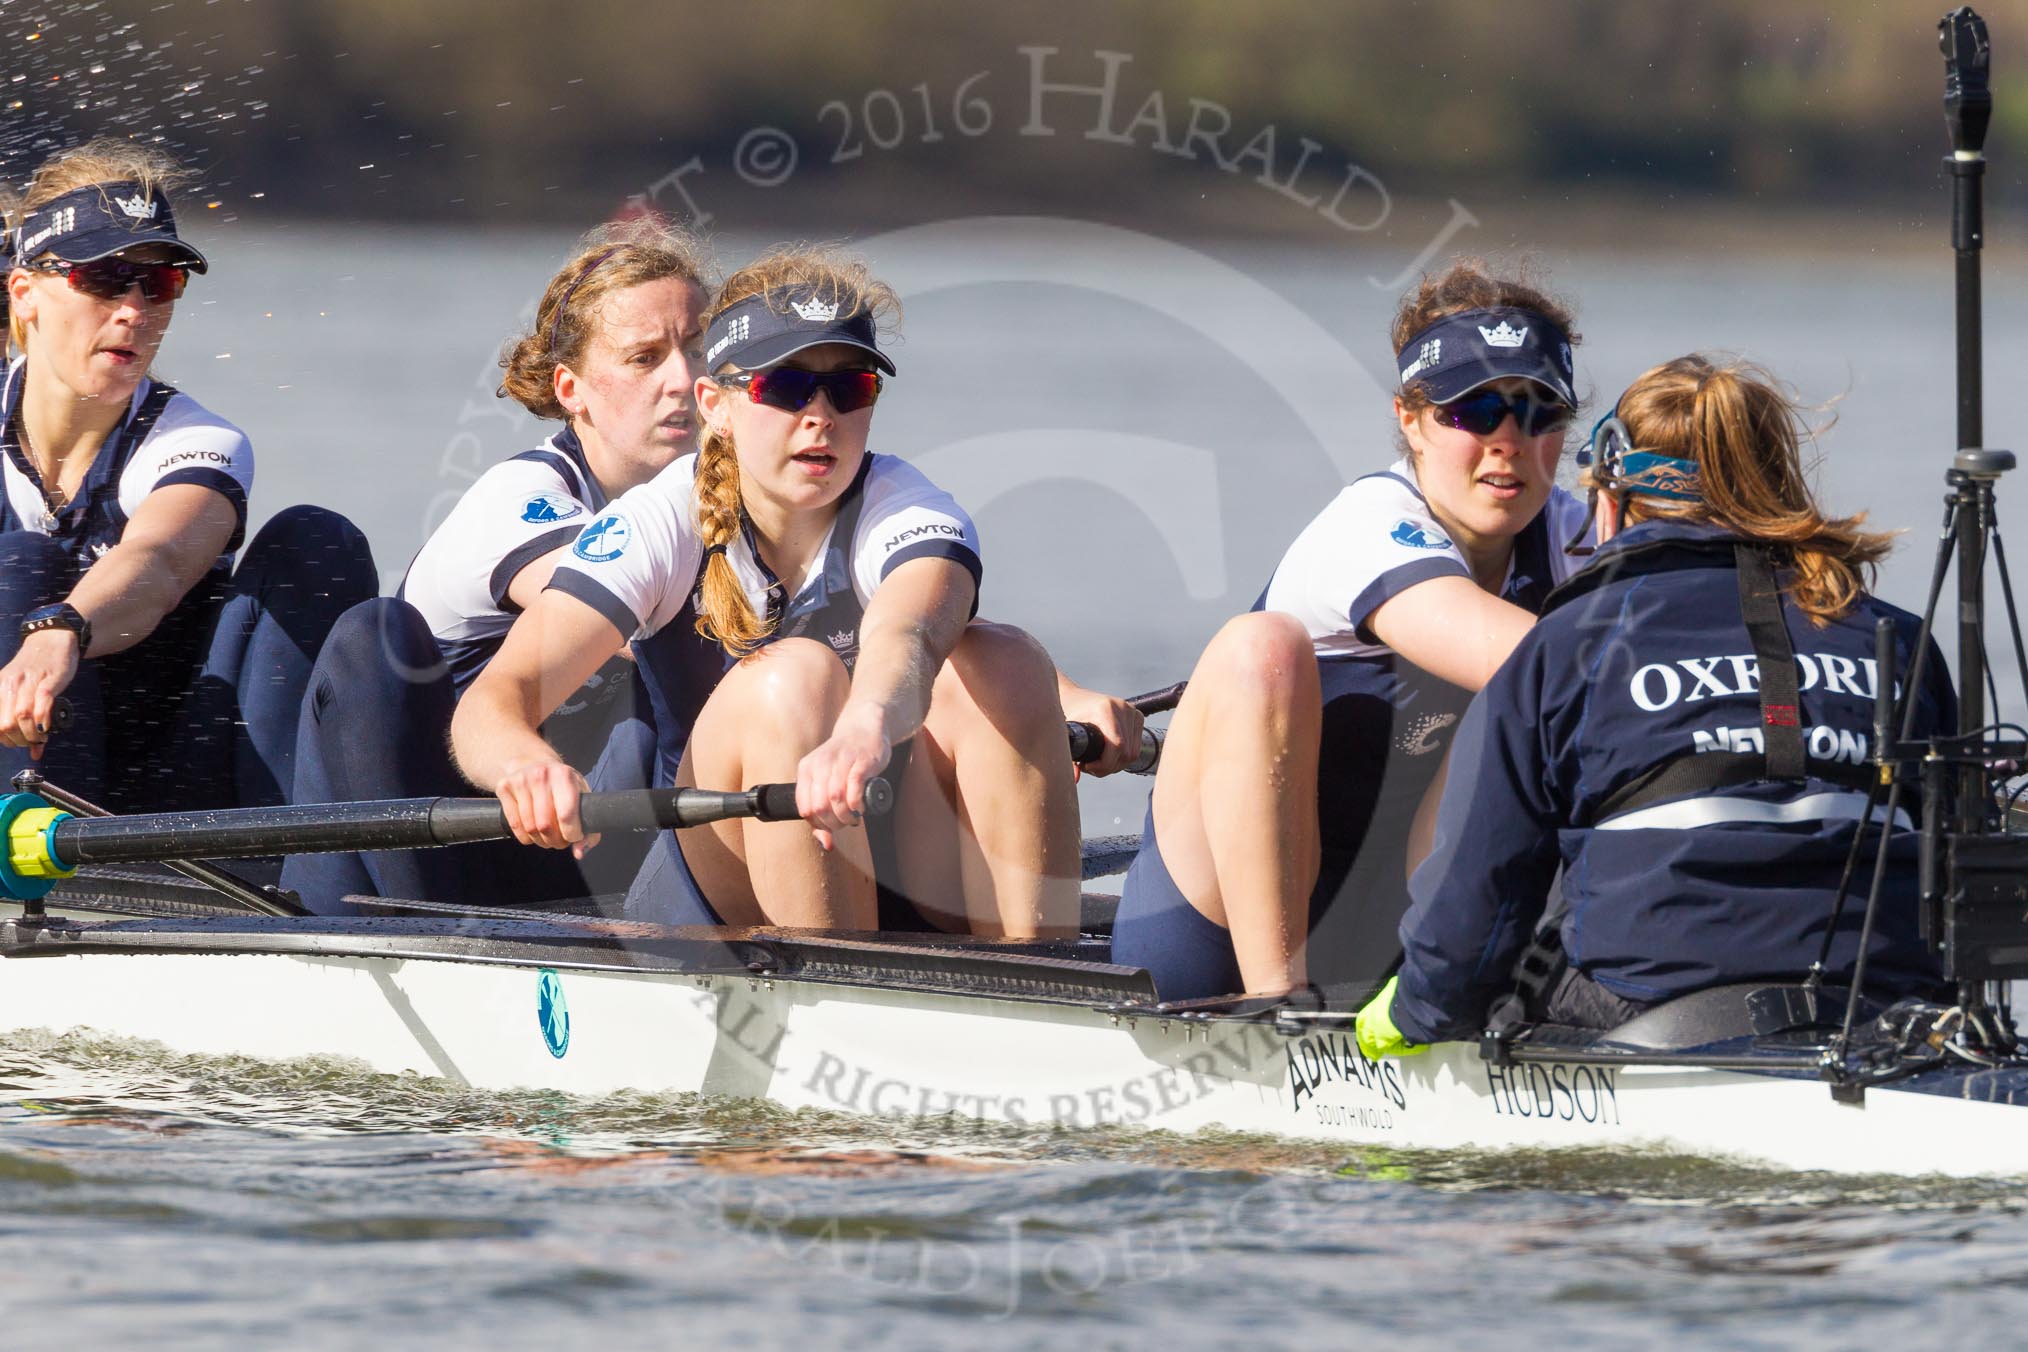 The Boat Race season 2016 -  The Cancer Research Women's Boat Race.
River Thames between Putney Bridge and Mortlake,
London SW15,

United Kingdom,
on 27 March 2016 at 14:12, image #198